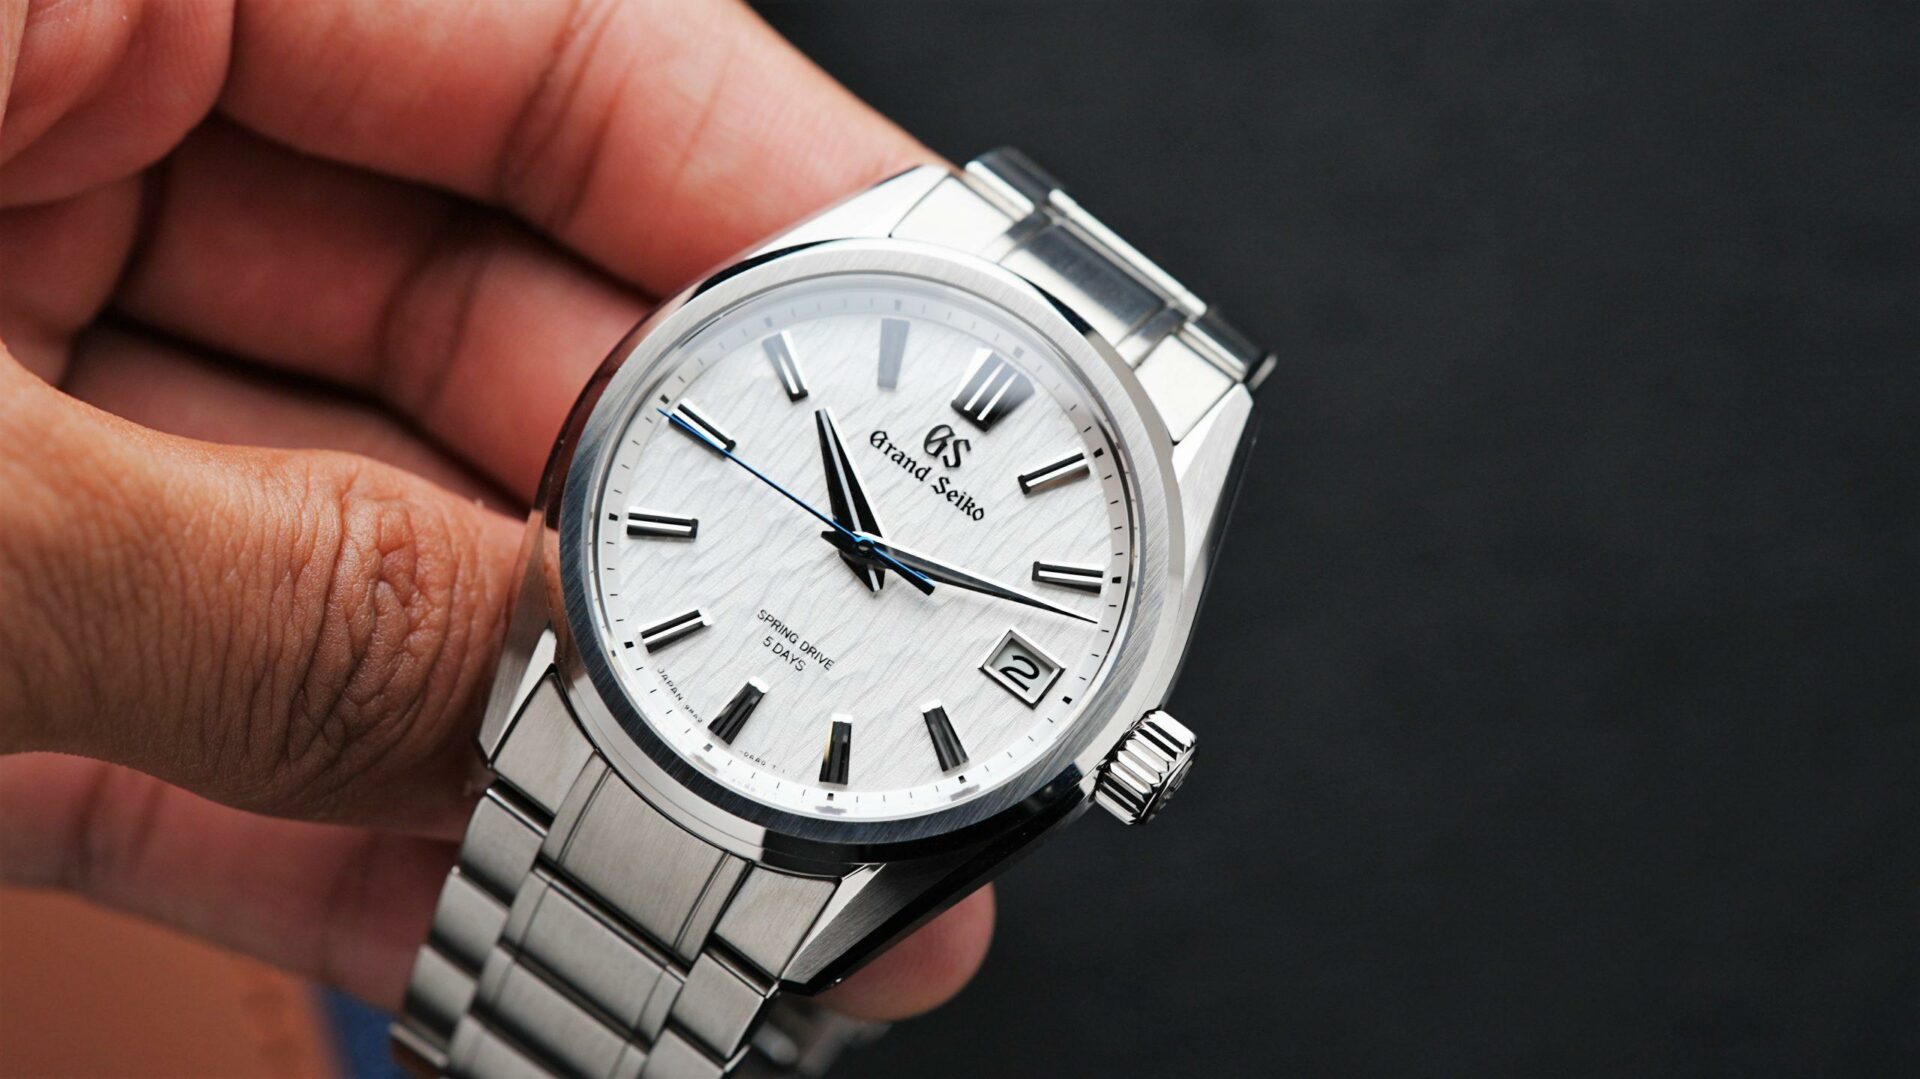 Grand Seiko Heritage Collection White Birch being held in hand.